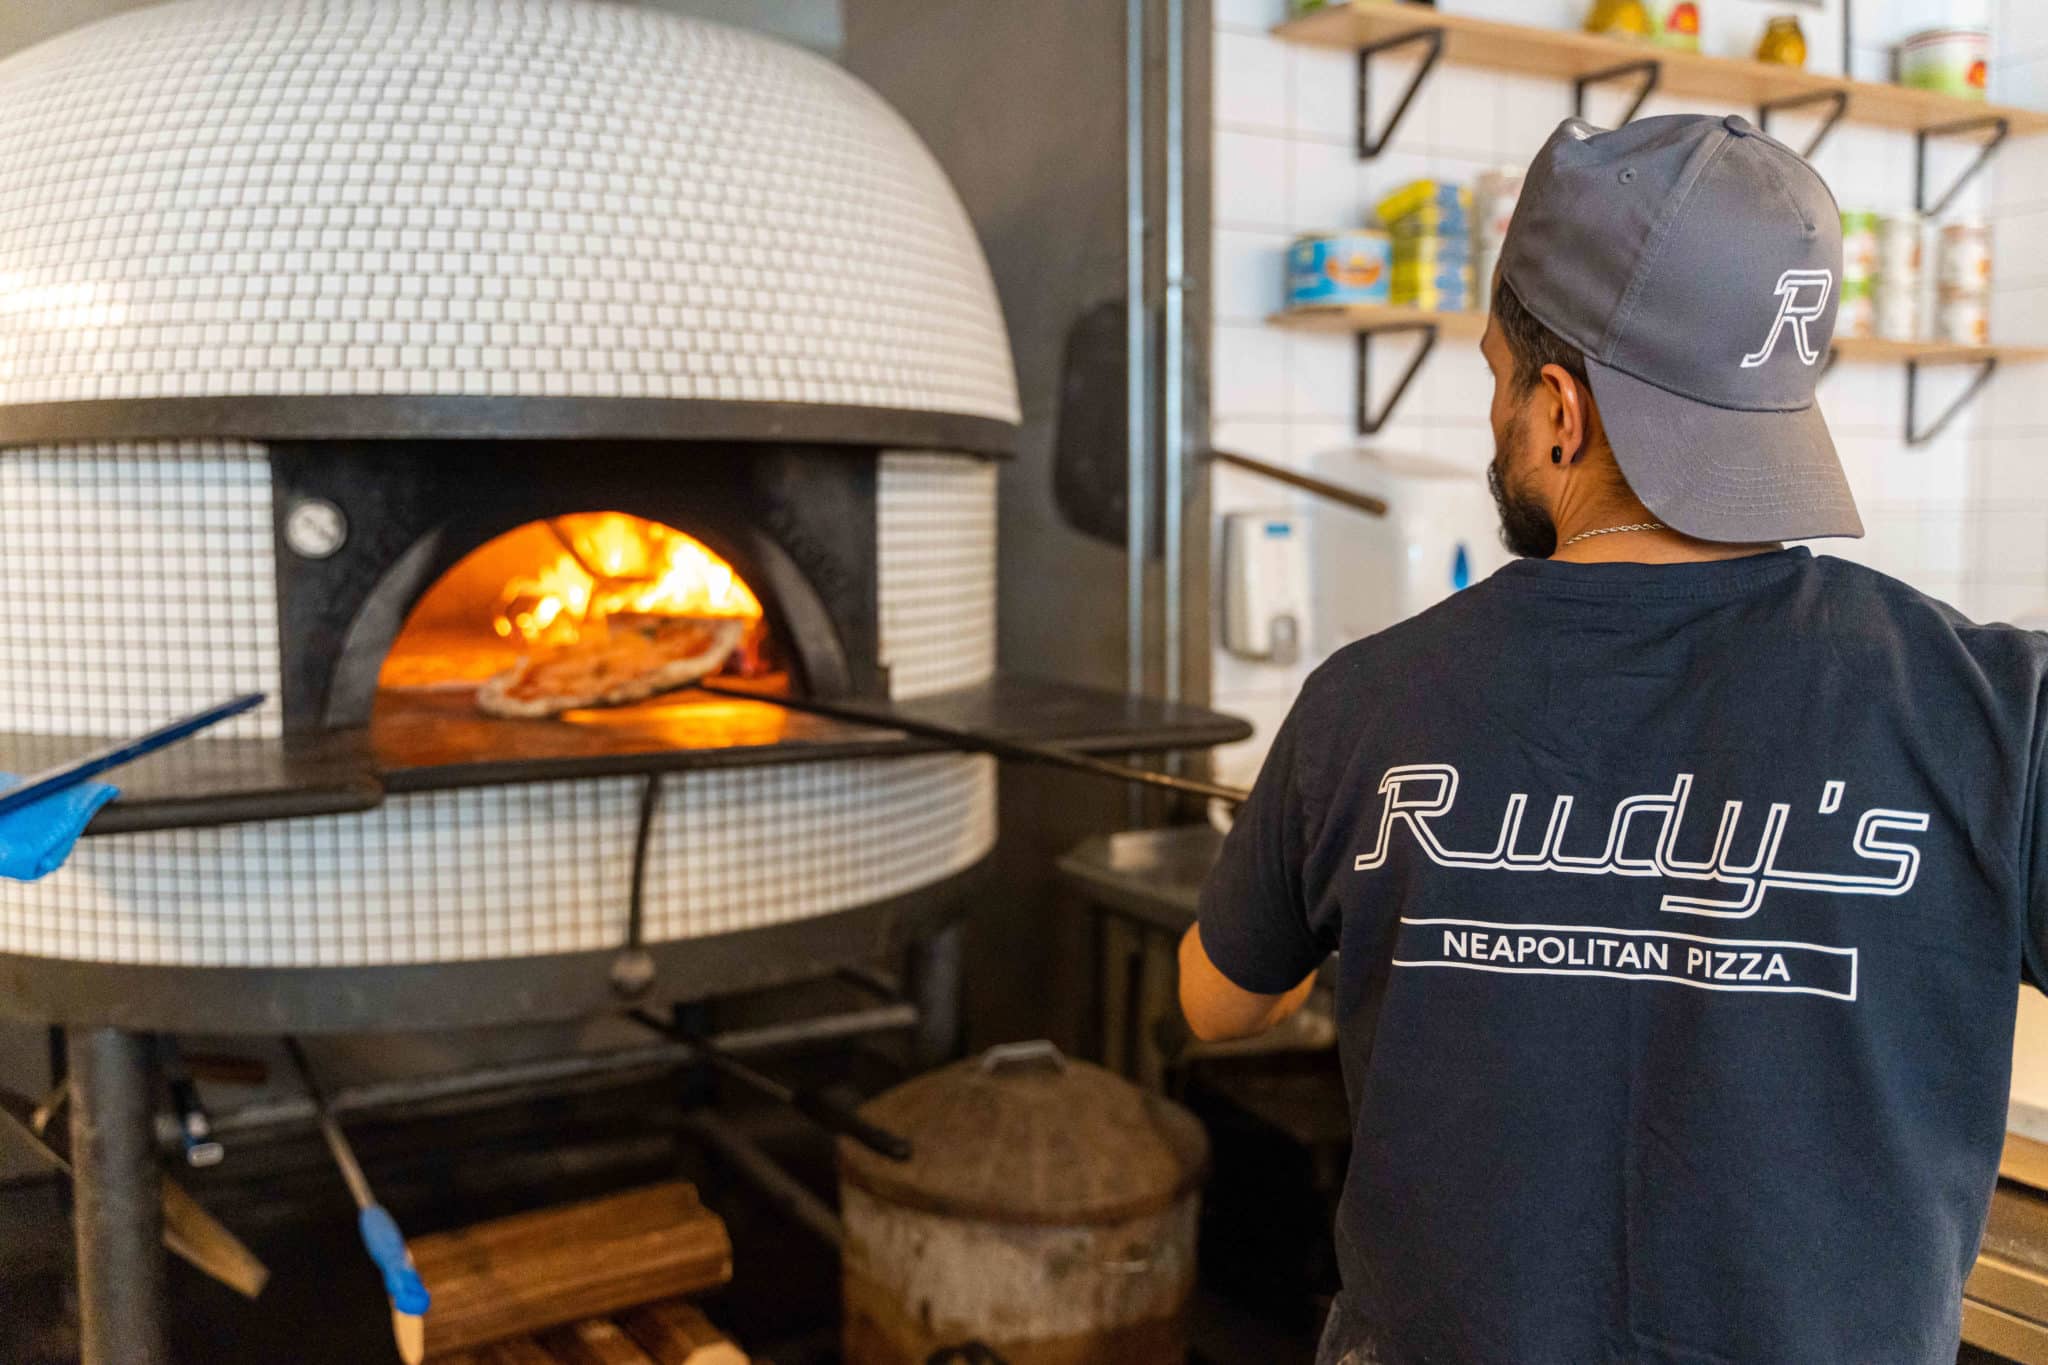 A man placing a pizza into a white pizza oven, wearing a tshirt that says 'Rudy's'.